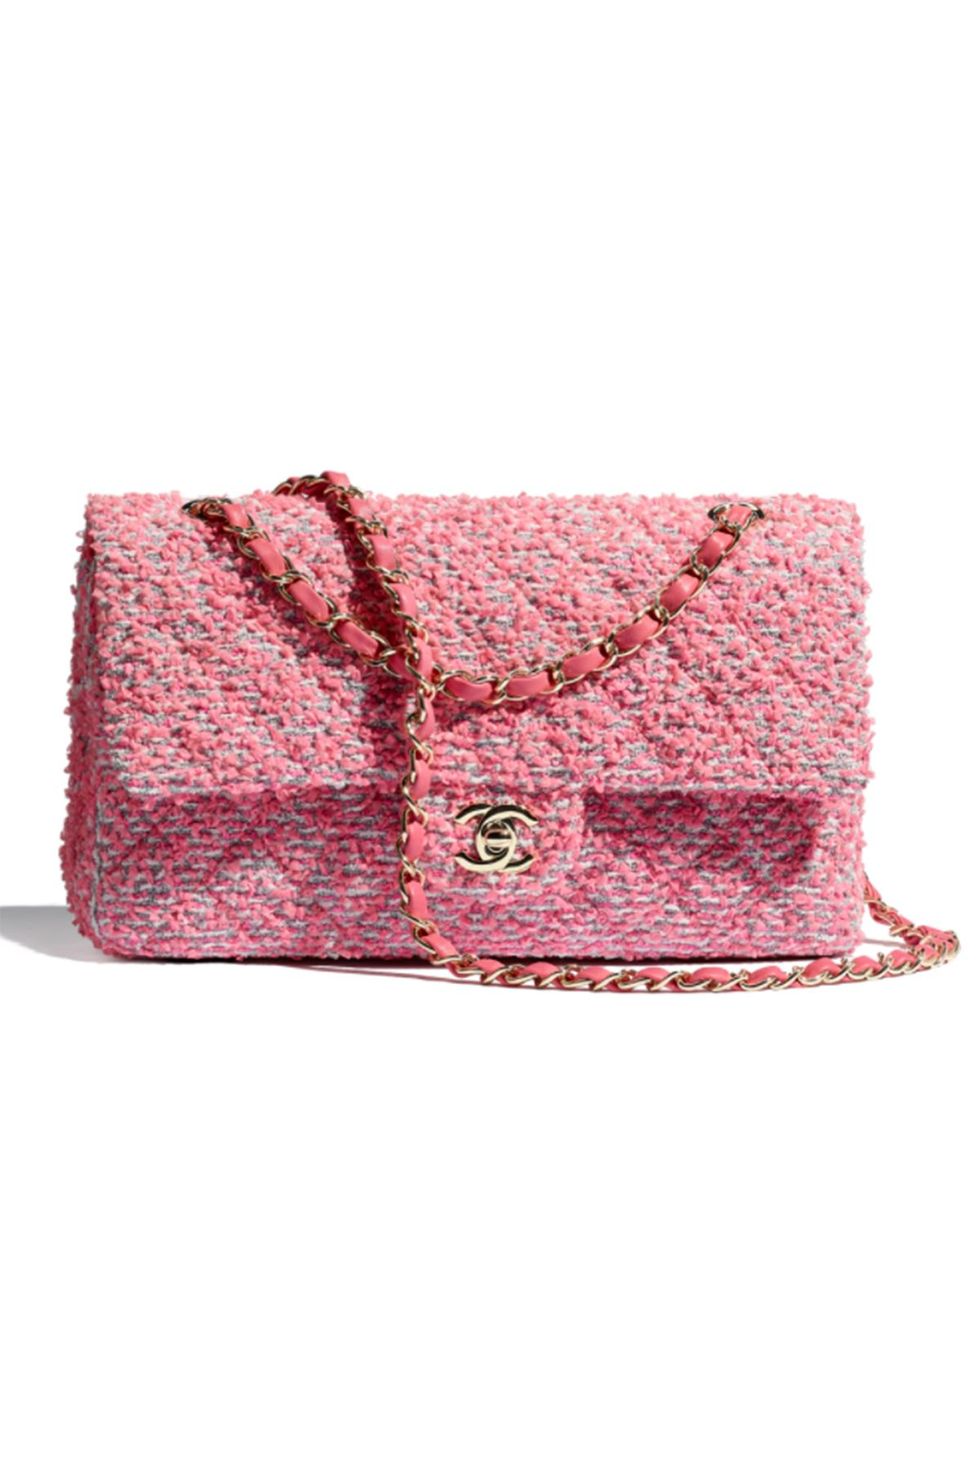 CHANEL Tweed Crystal Bead Flower Embellished Quilted Medium Double Flap Pink  1224389